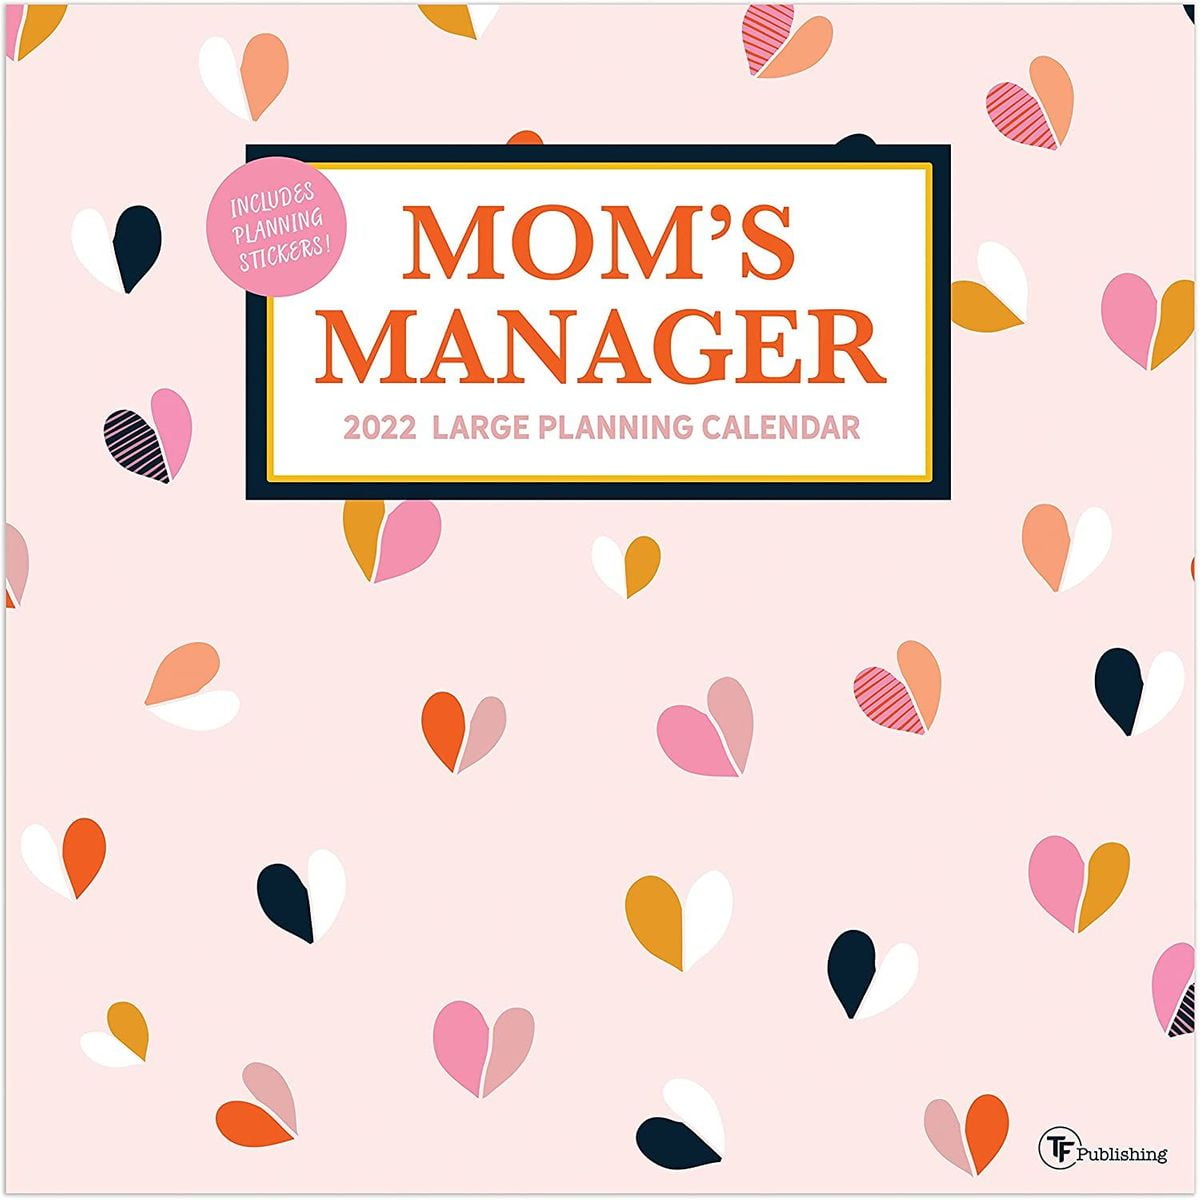 2021 BIG Grid Moms Family Schedule Manager Organizer Planner Wall Calendar 